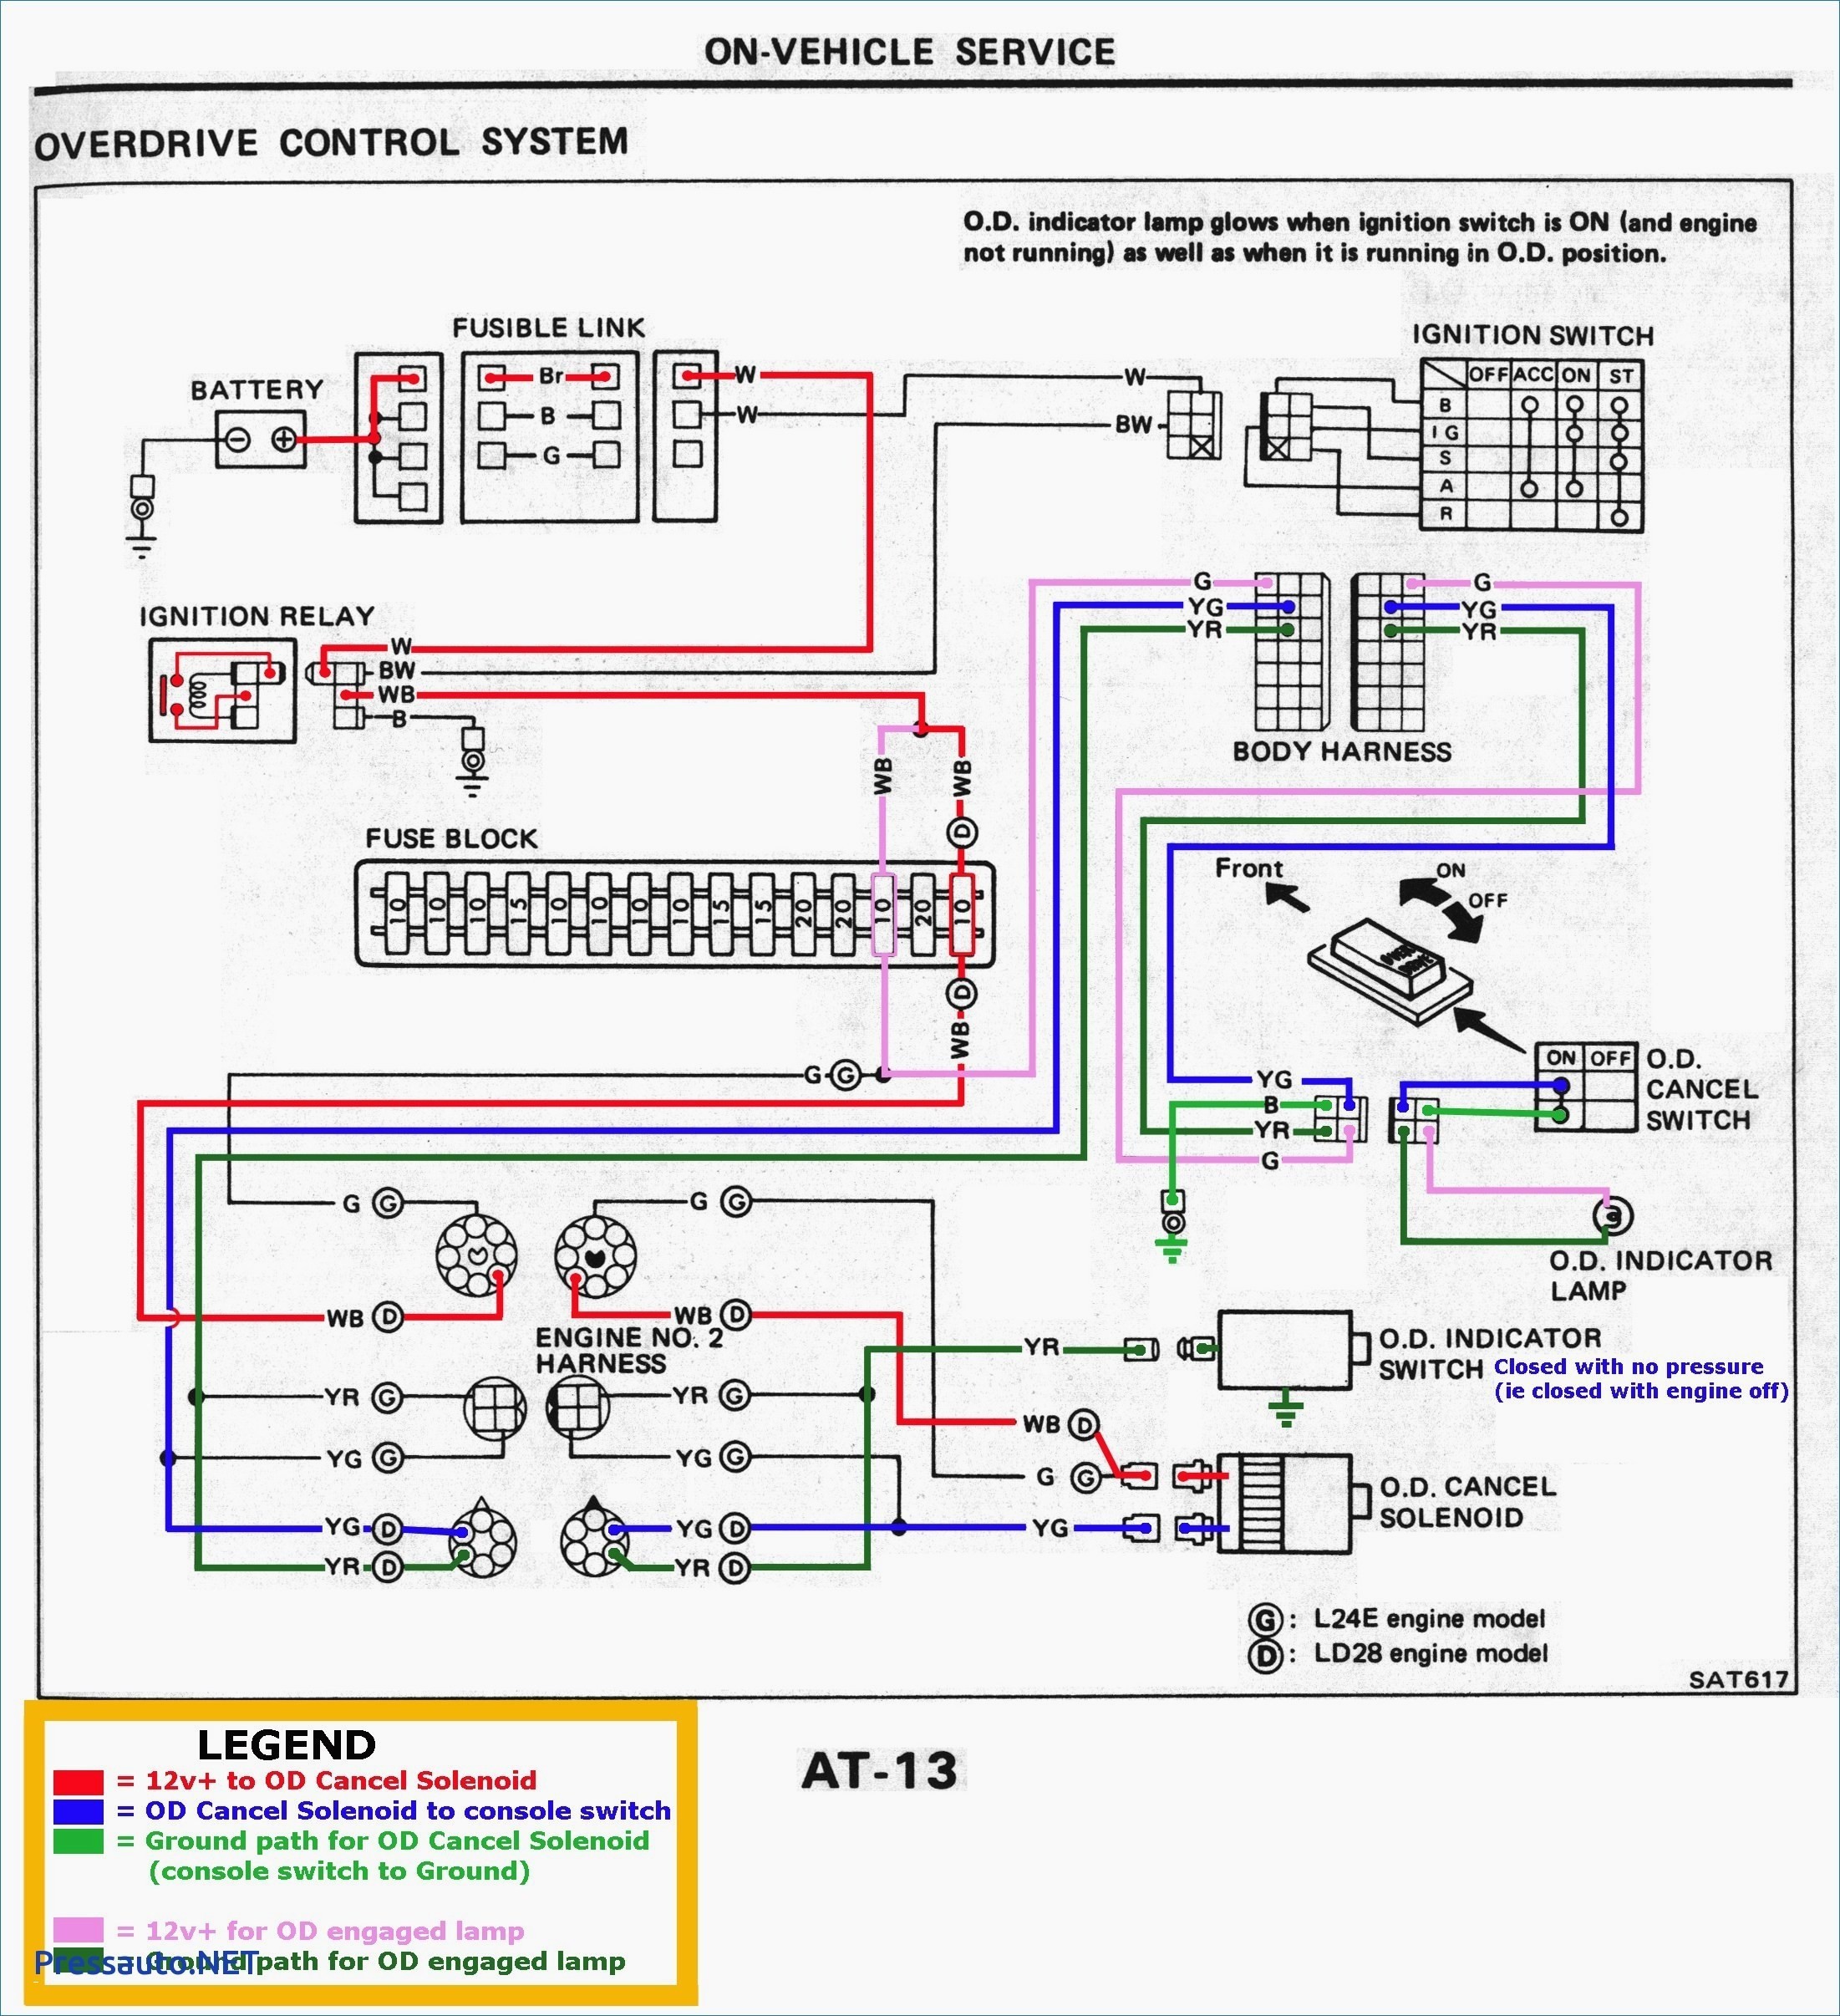 Safety Vision Camera Wiring Diagram Wiring Diagram for Rear View Camera Inspirationa Bunker Hill Security